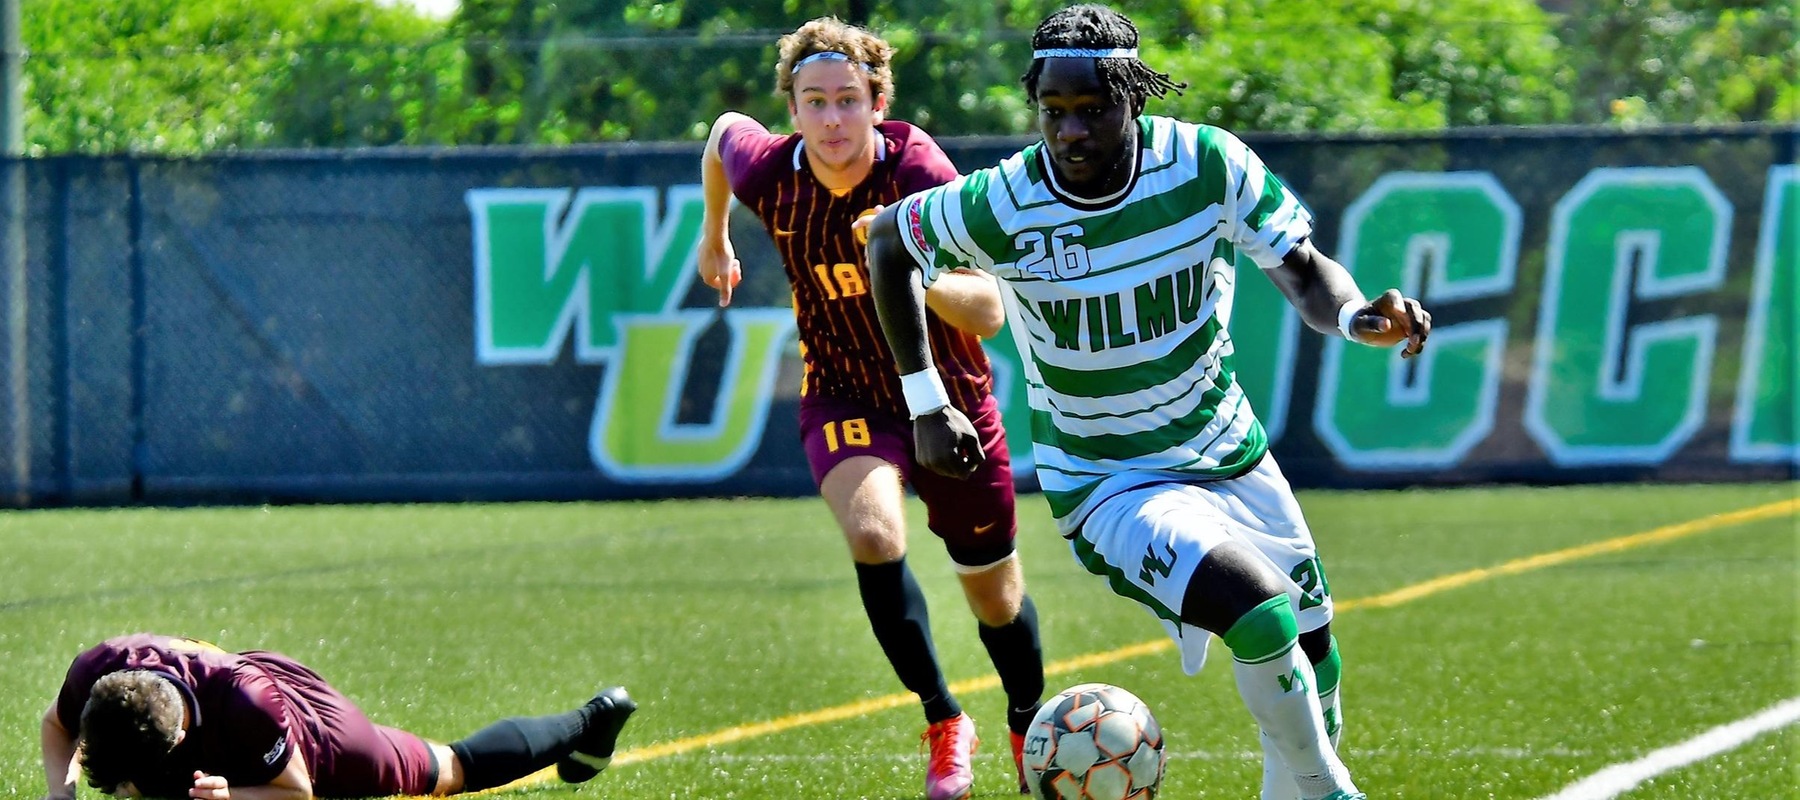 File photo of Hakim Williams who scored in the 99th minute to win it for the Wildcats at Millersville, 2-1. Copyright 2021; Wilmington University. All rights reserved. Photo by James Jones. September 18 vs. Gannon.